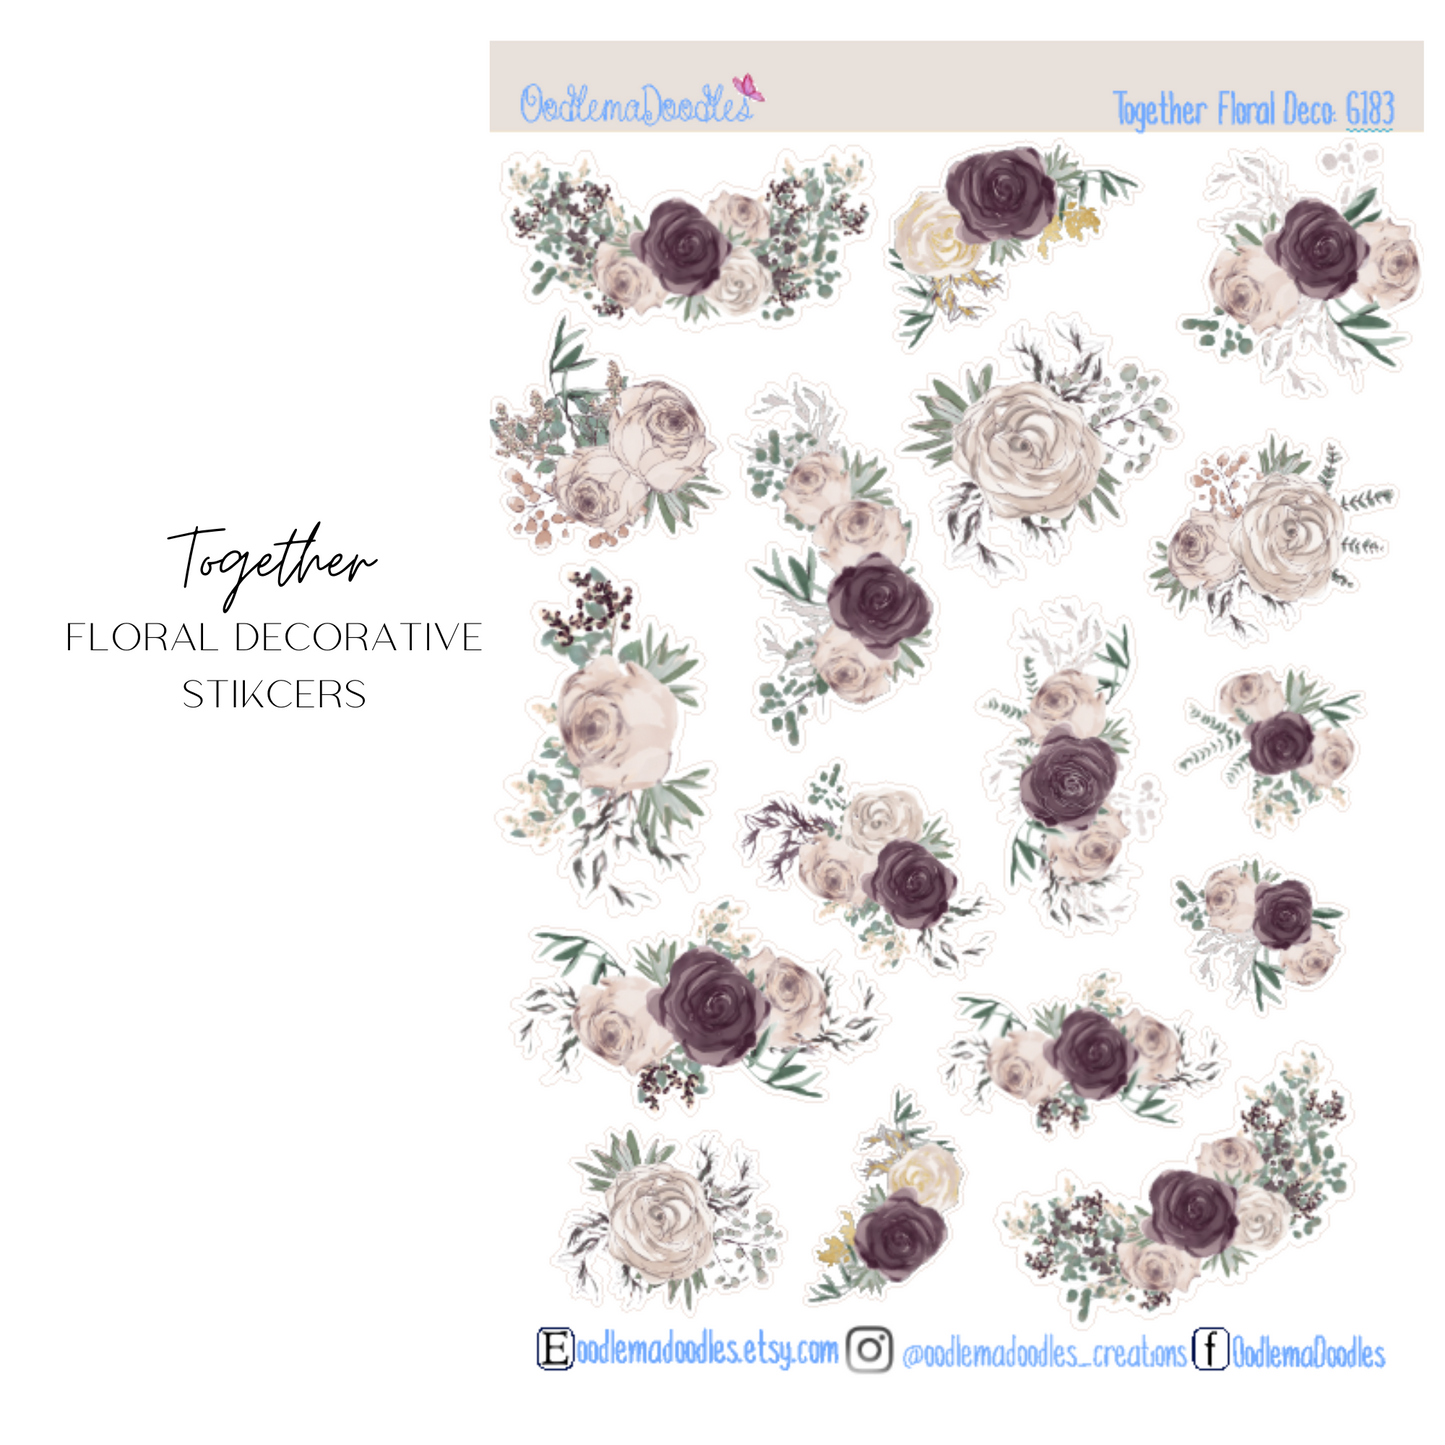 Together Floral Decorative Stickers